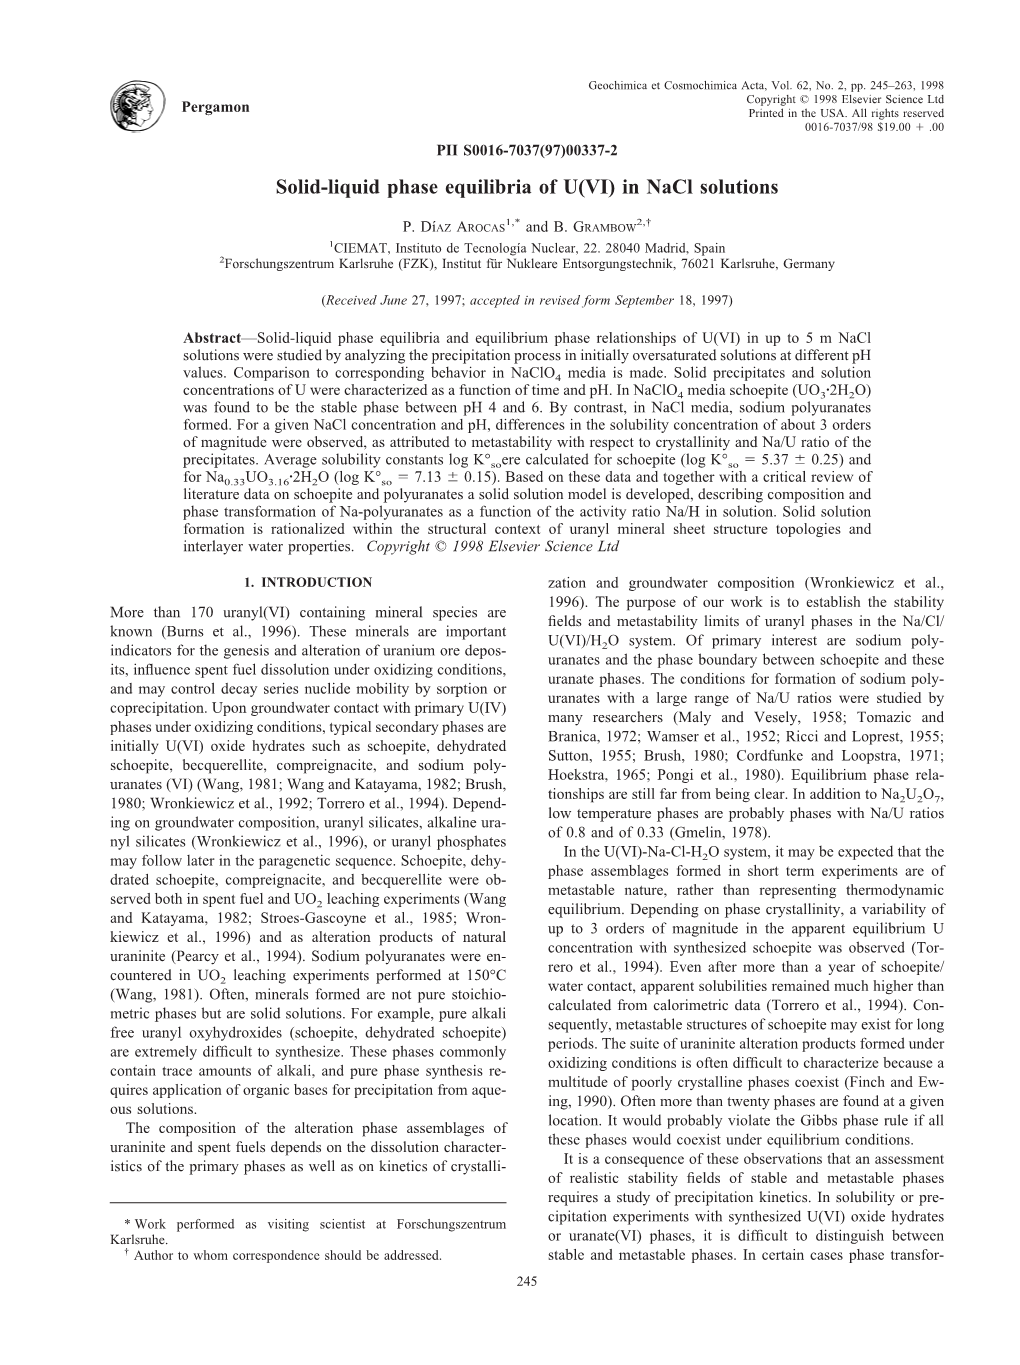 Solid-Liquid Phase Equilibria of U(VI) in Nacl Solutions